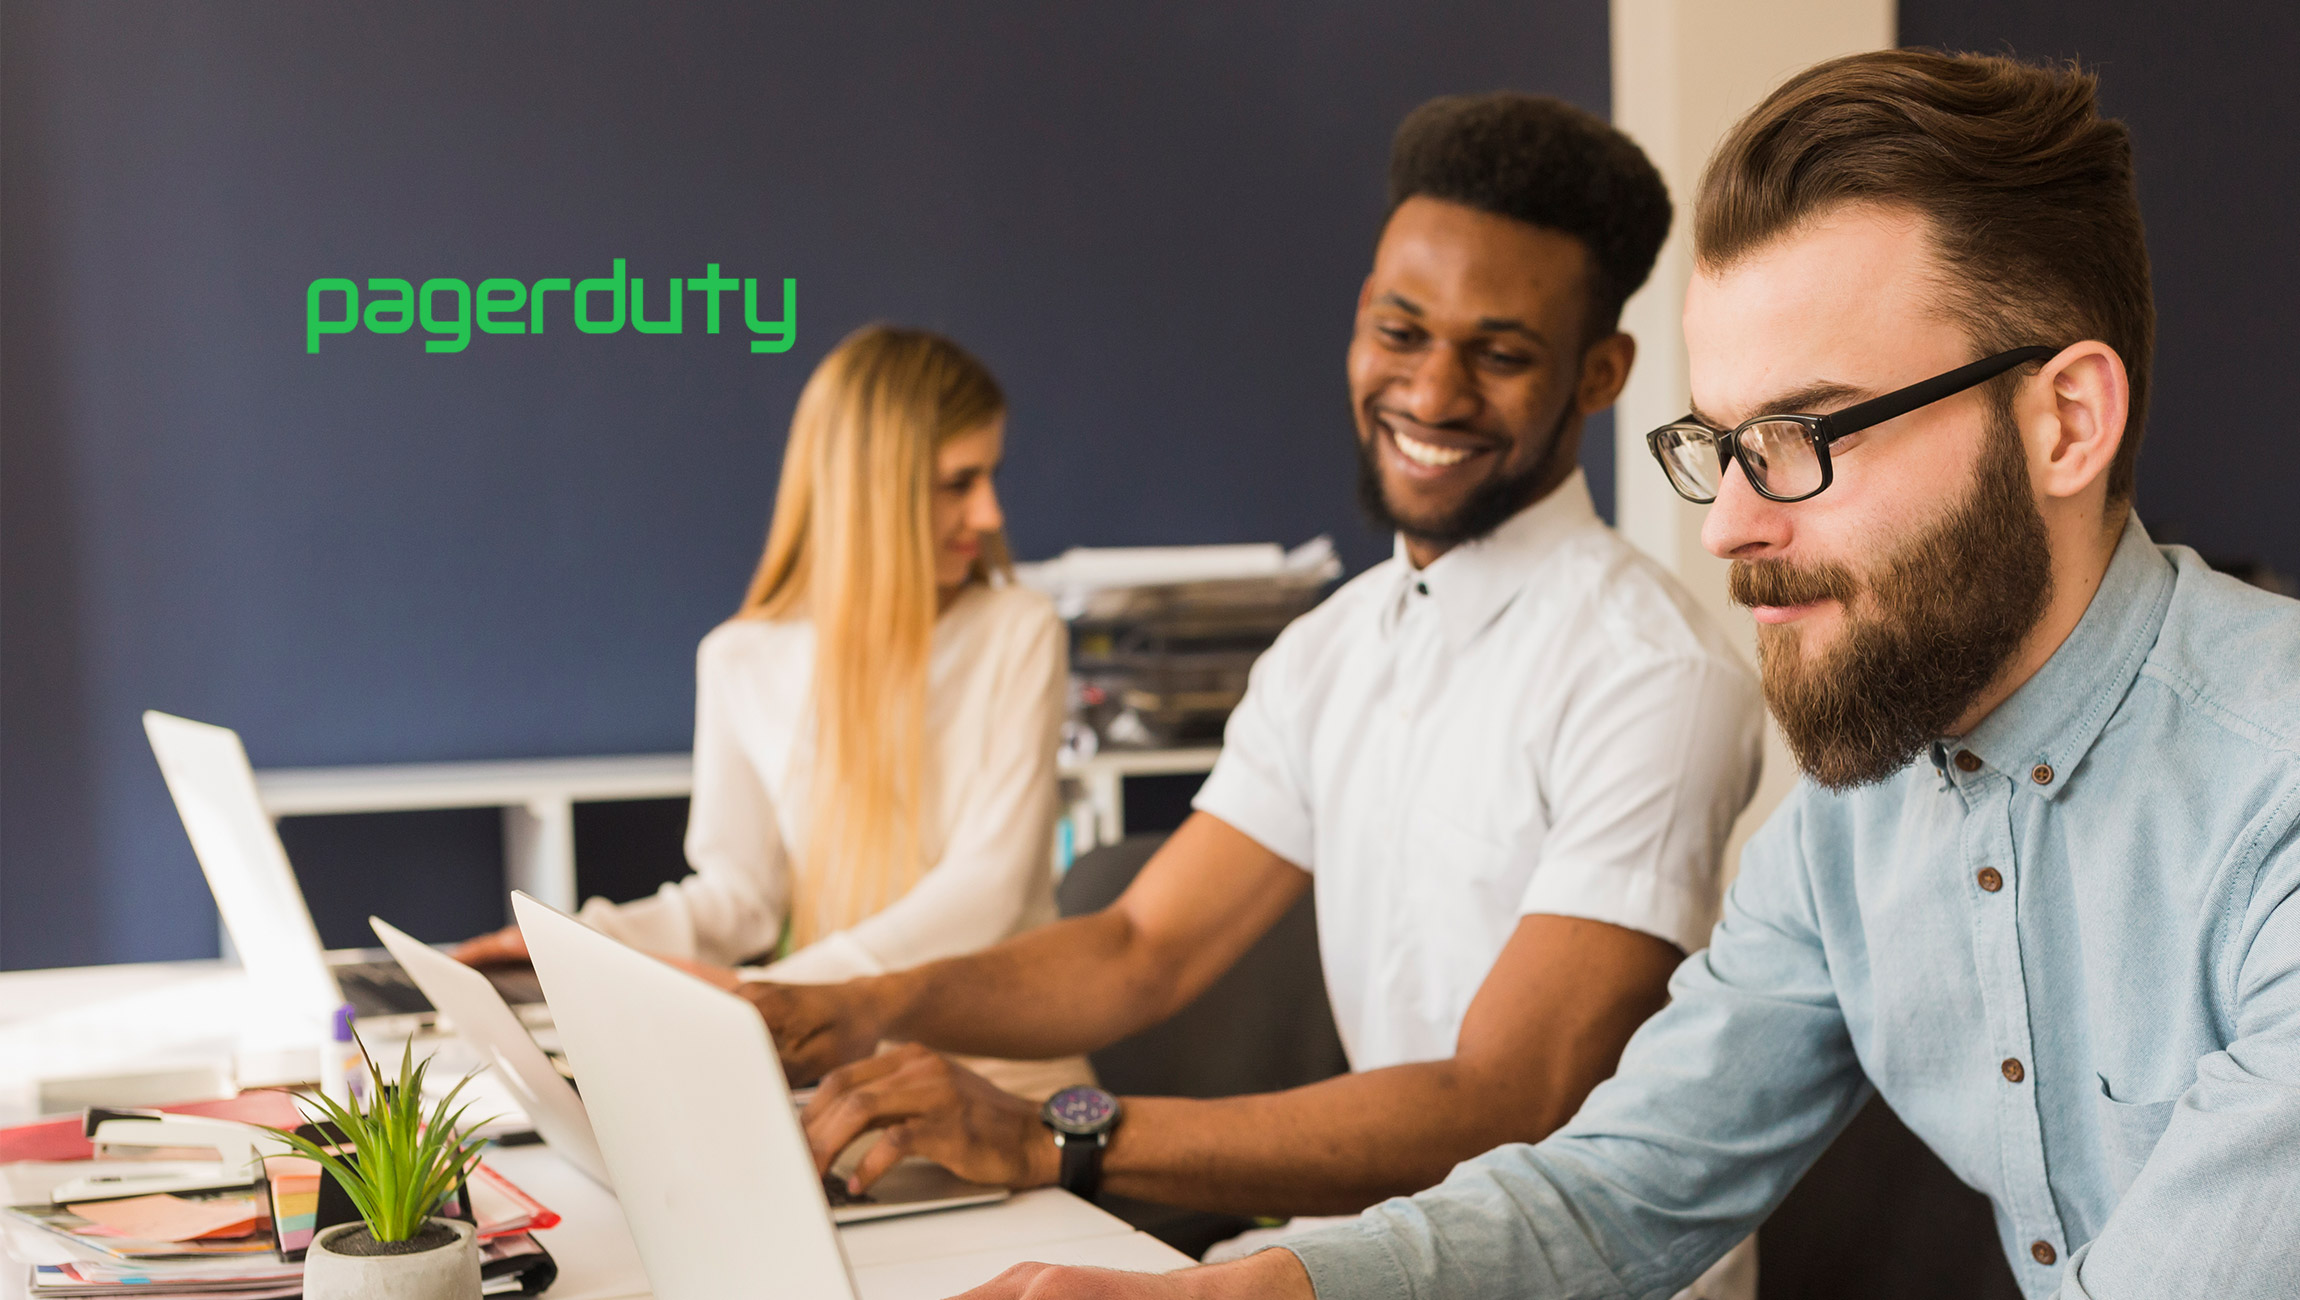 New PagerDuty and Zoom Integration Speeds Up Digital Teamwork, while Accelerating Incident Resolution and Boosting Team Productivity